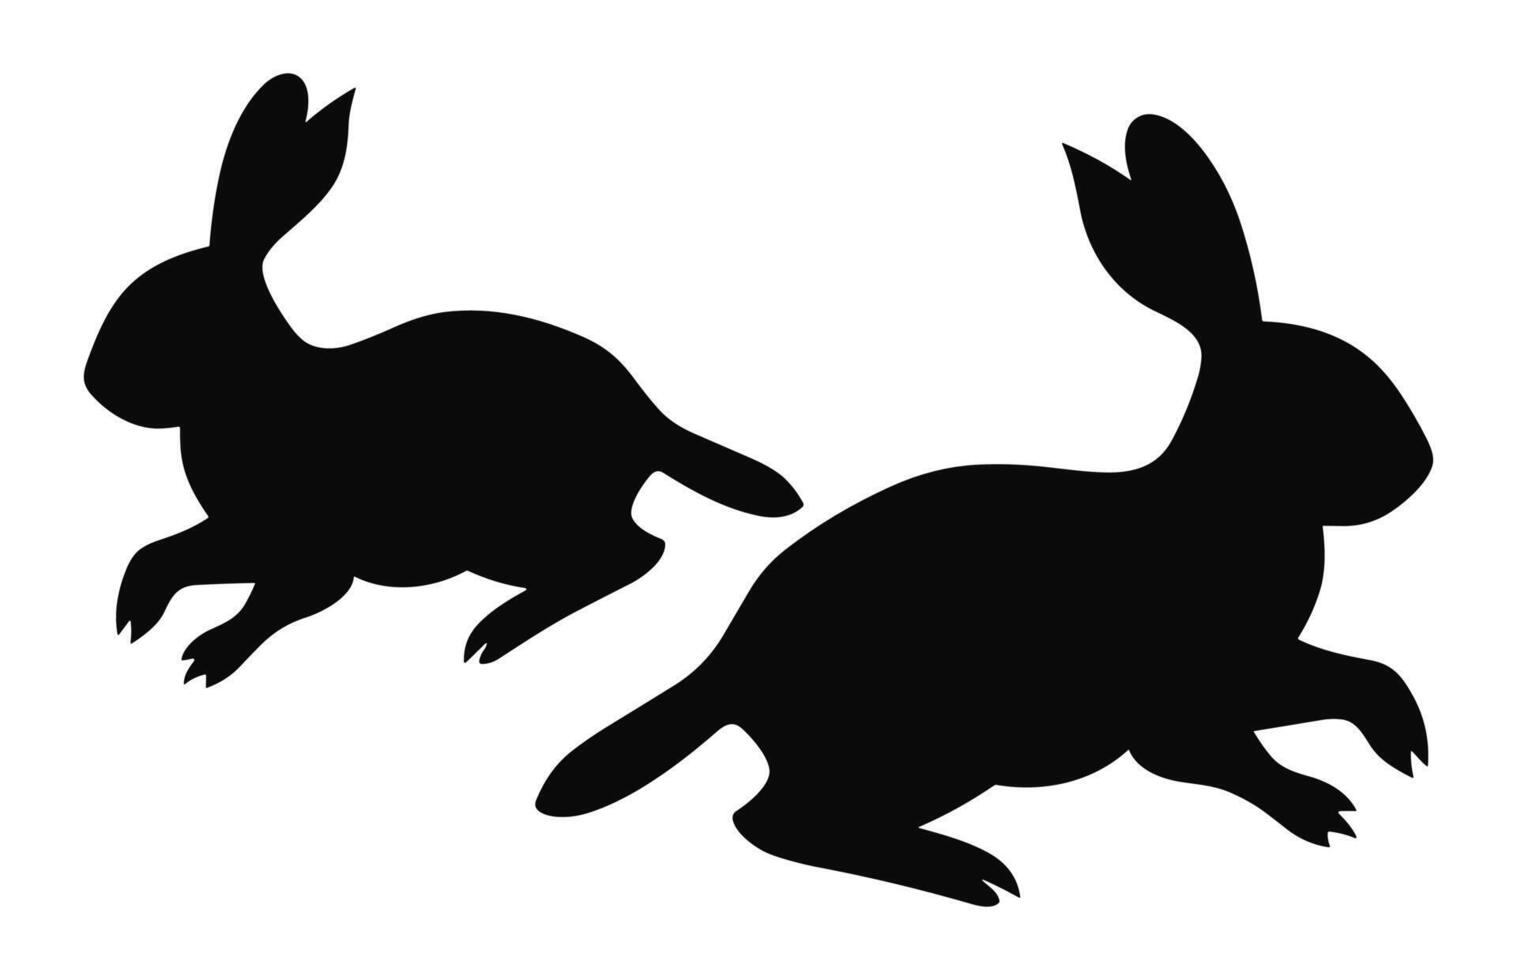 Two Rabbit are running silhouette vector isolated on a white background